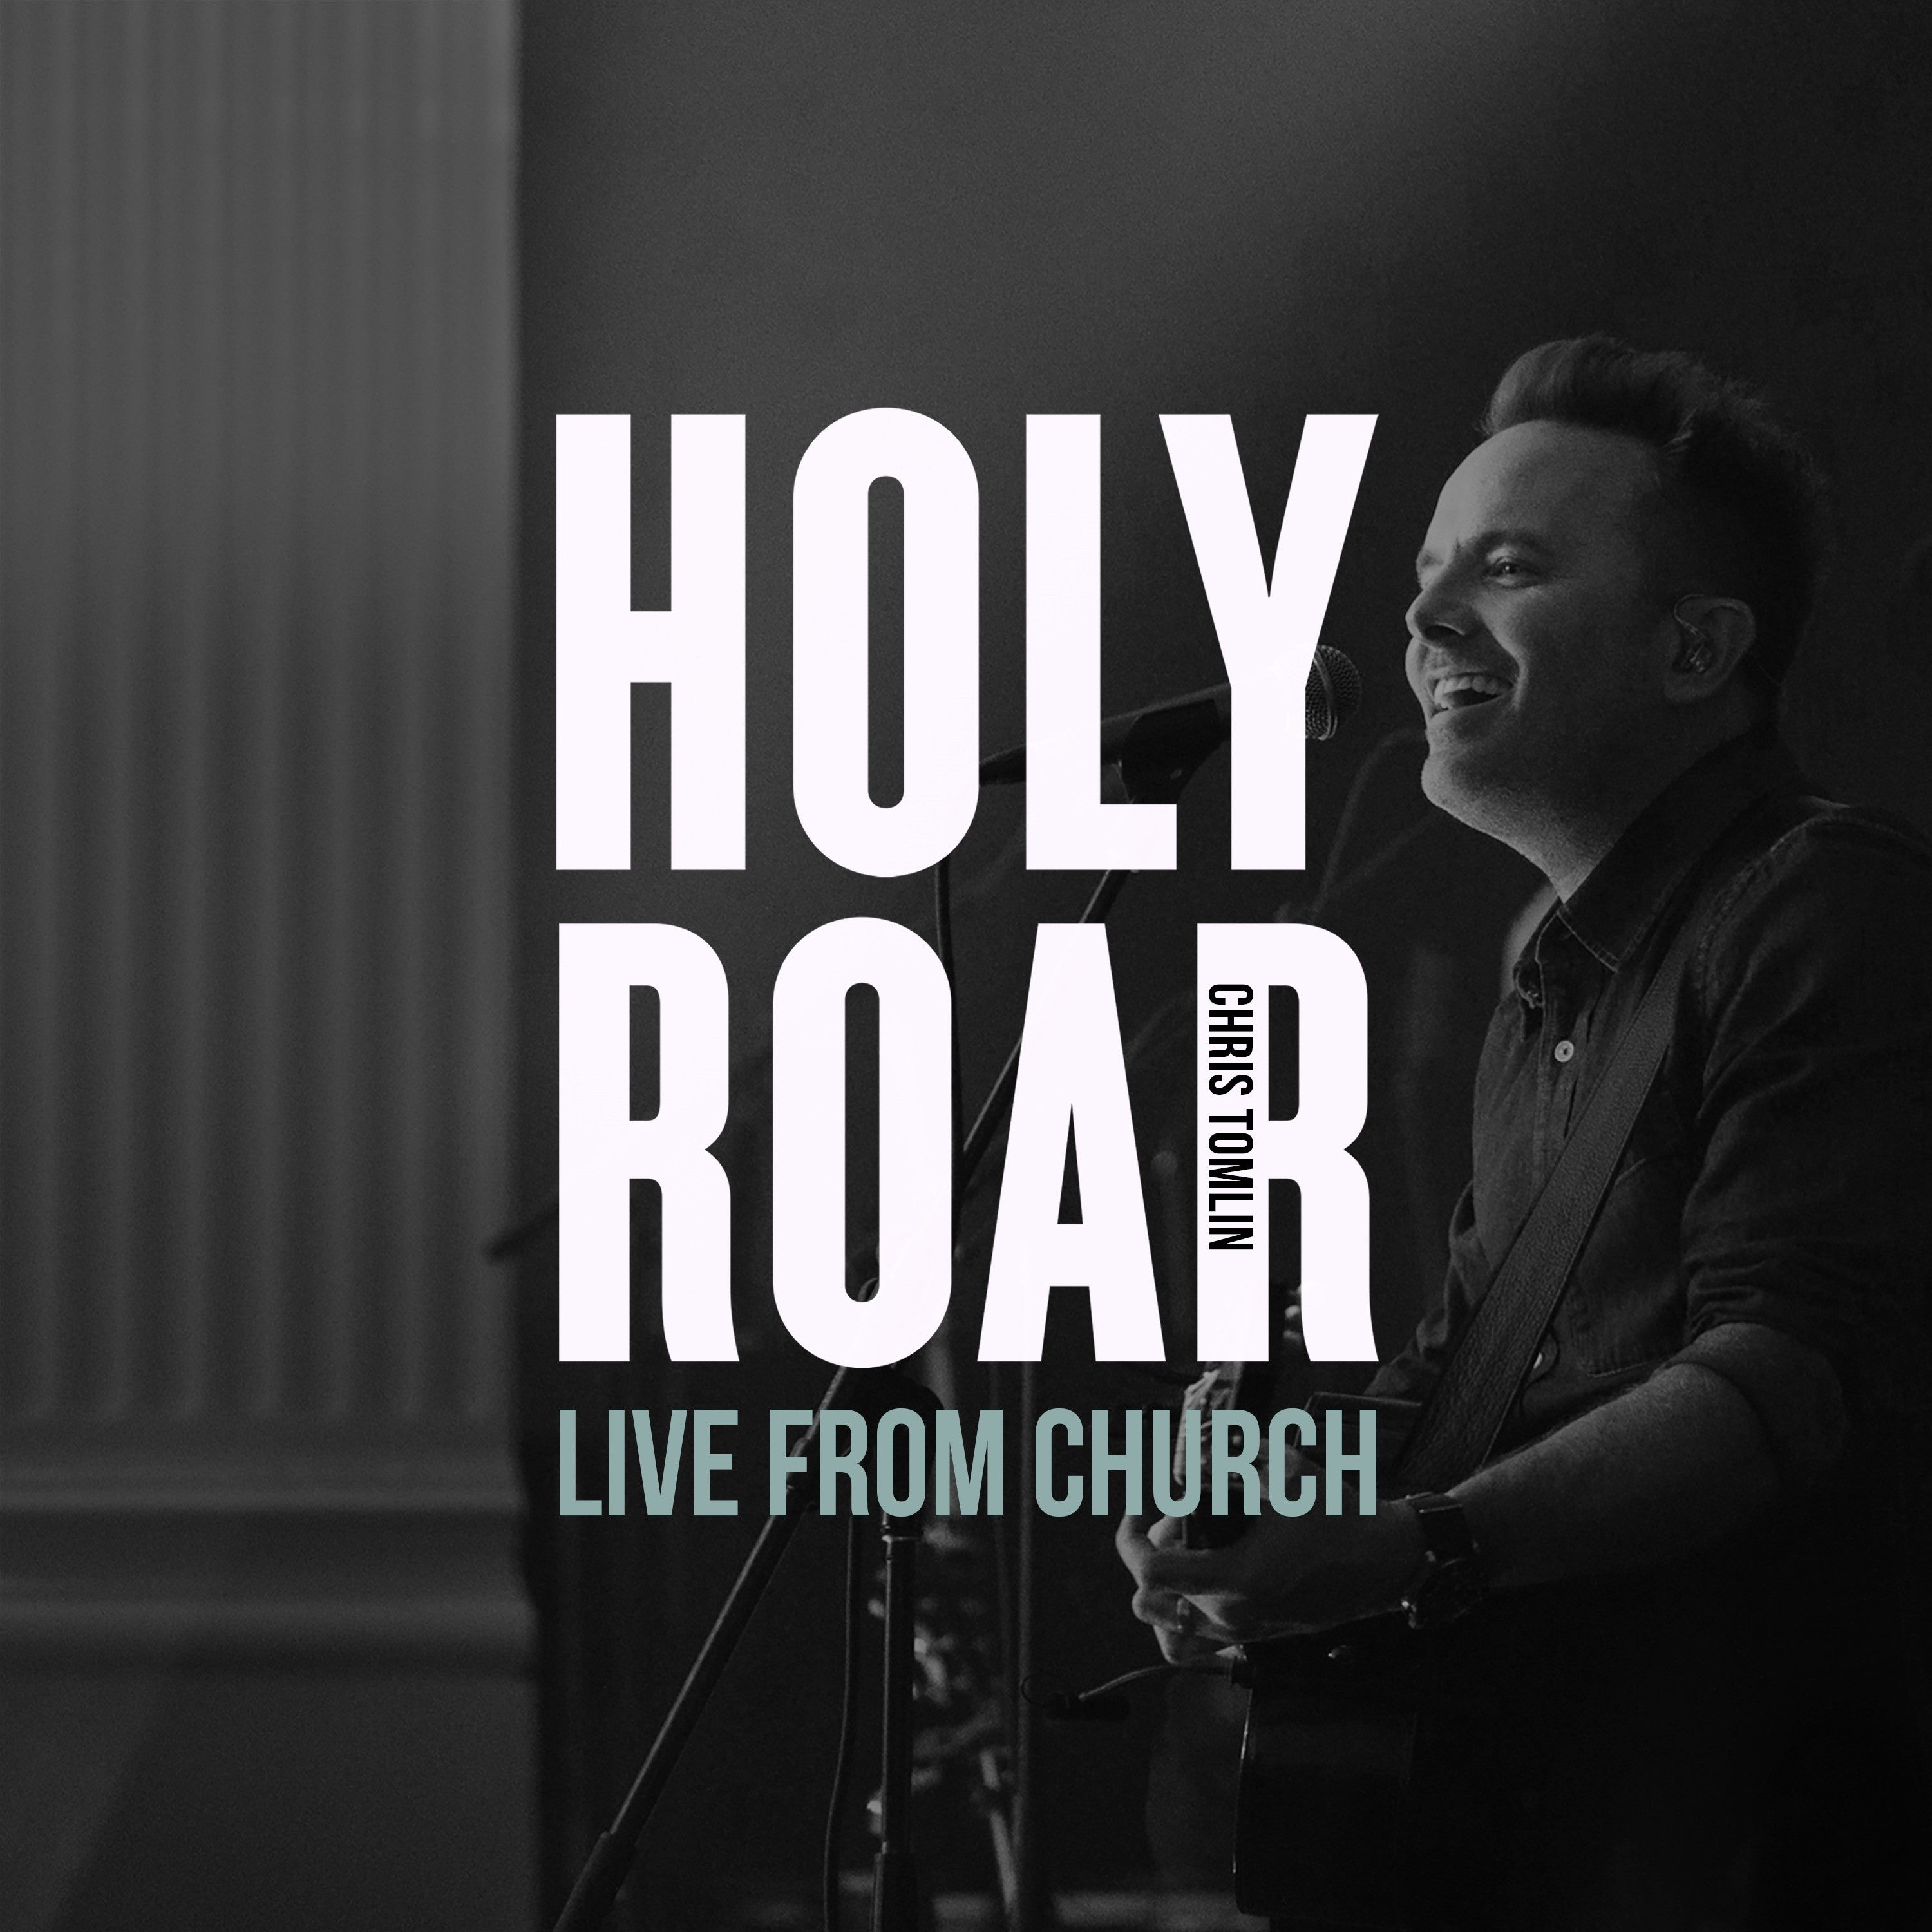 Image of Holy Roar Live other